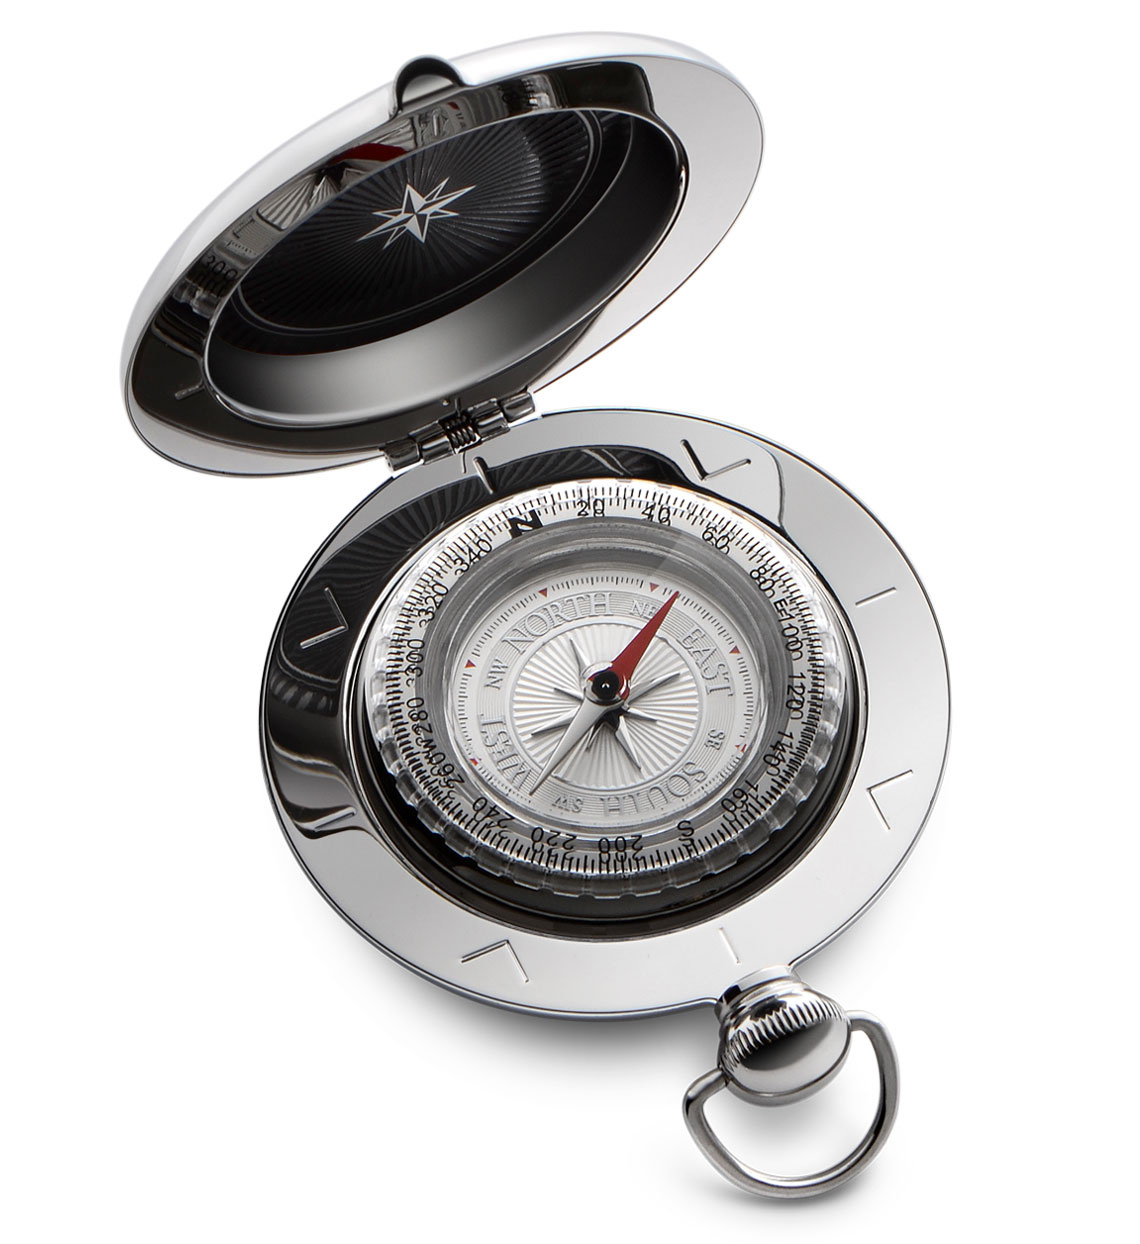 dalvey voyager compass review